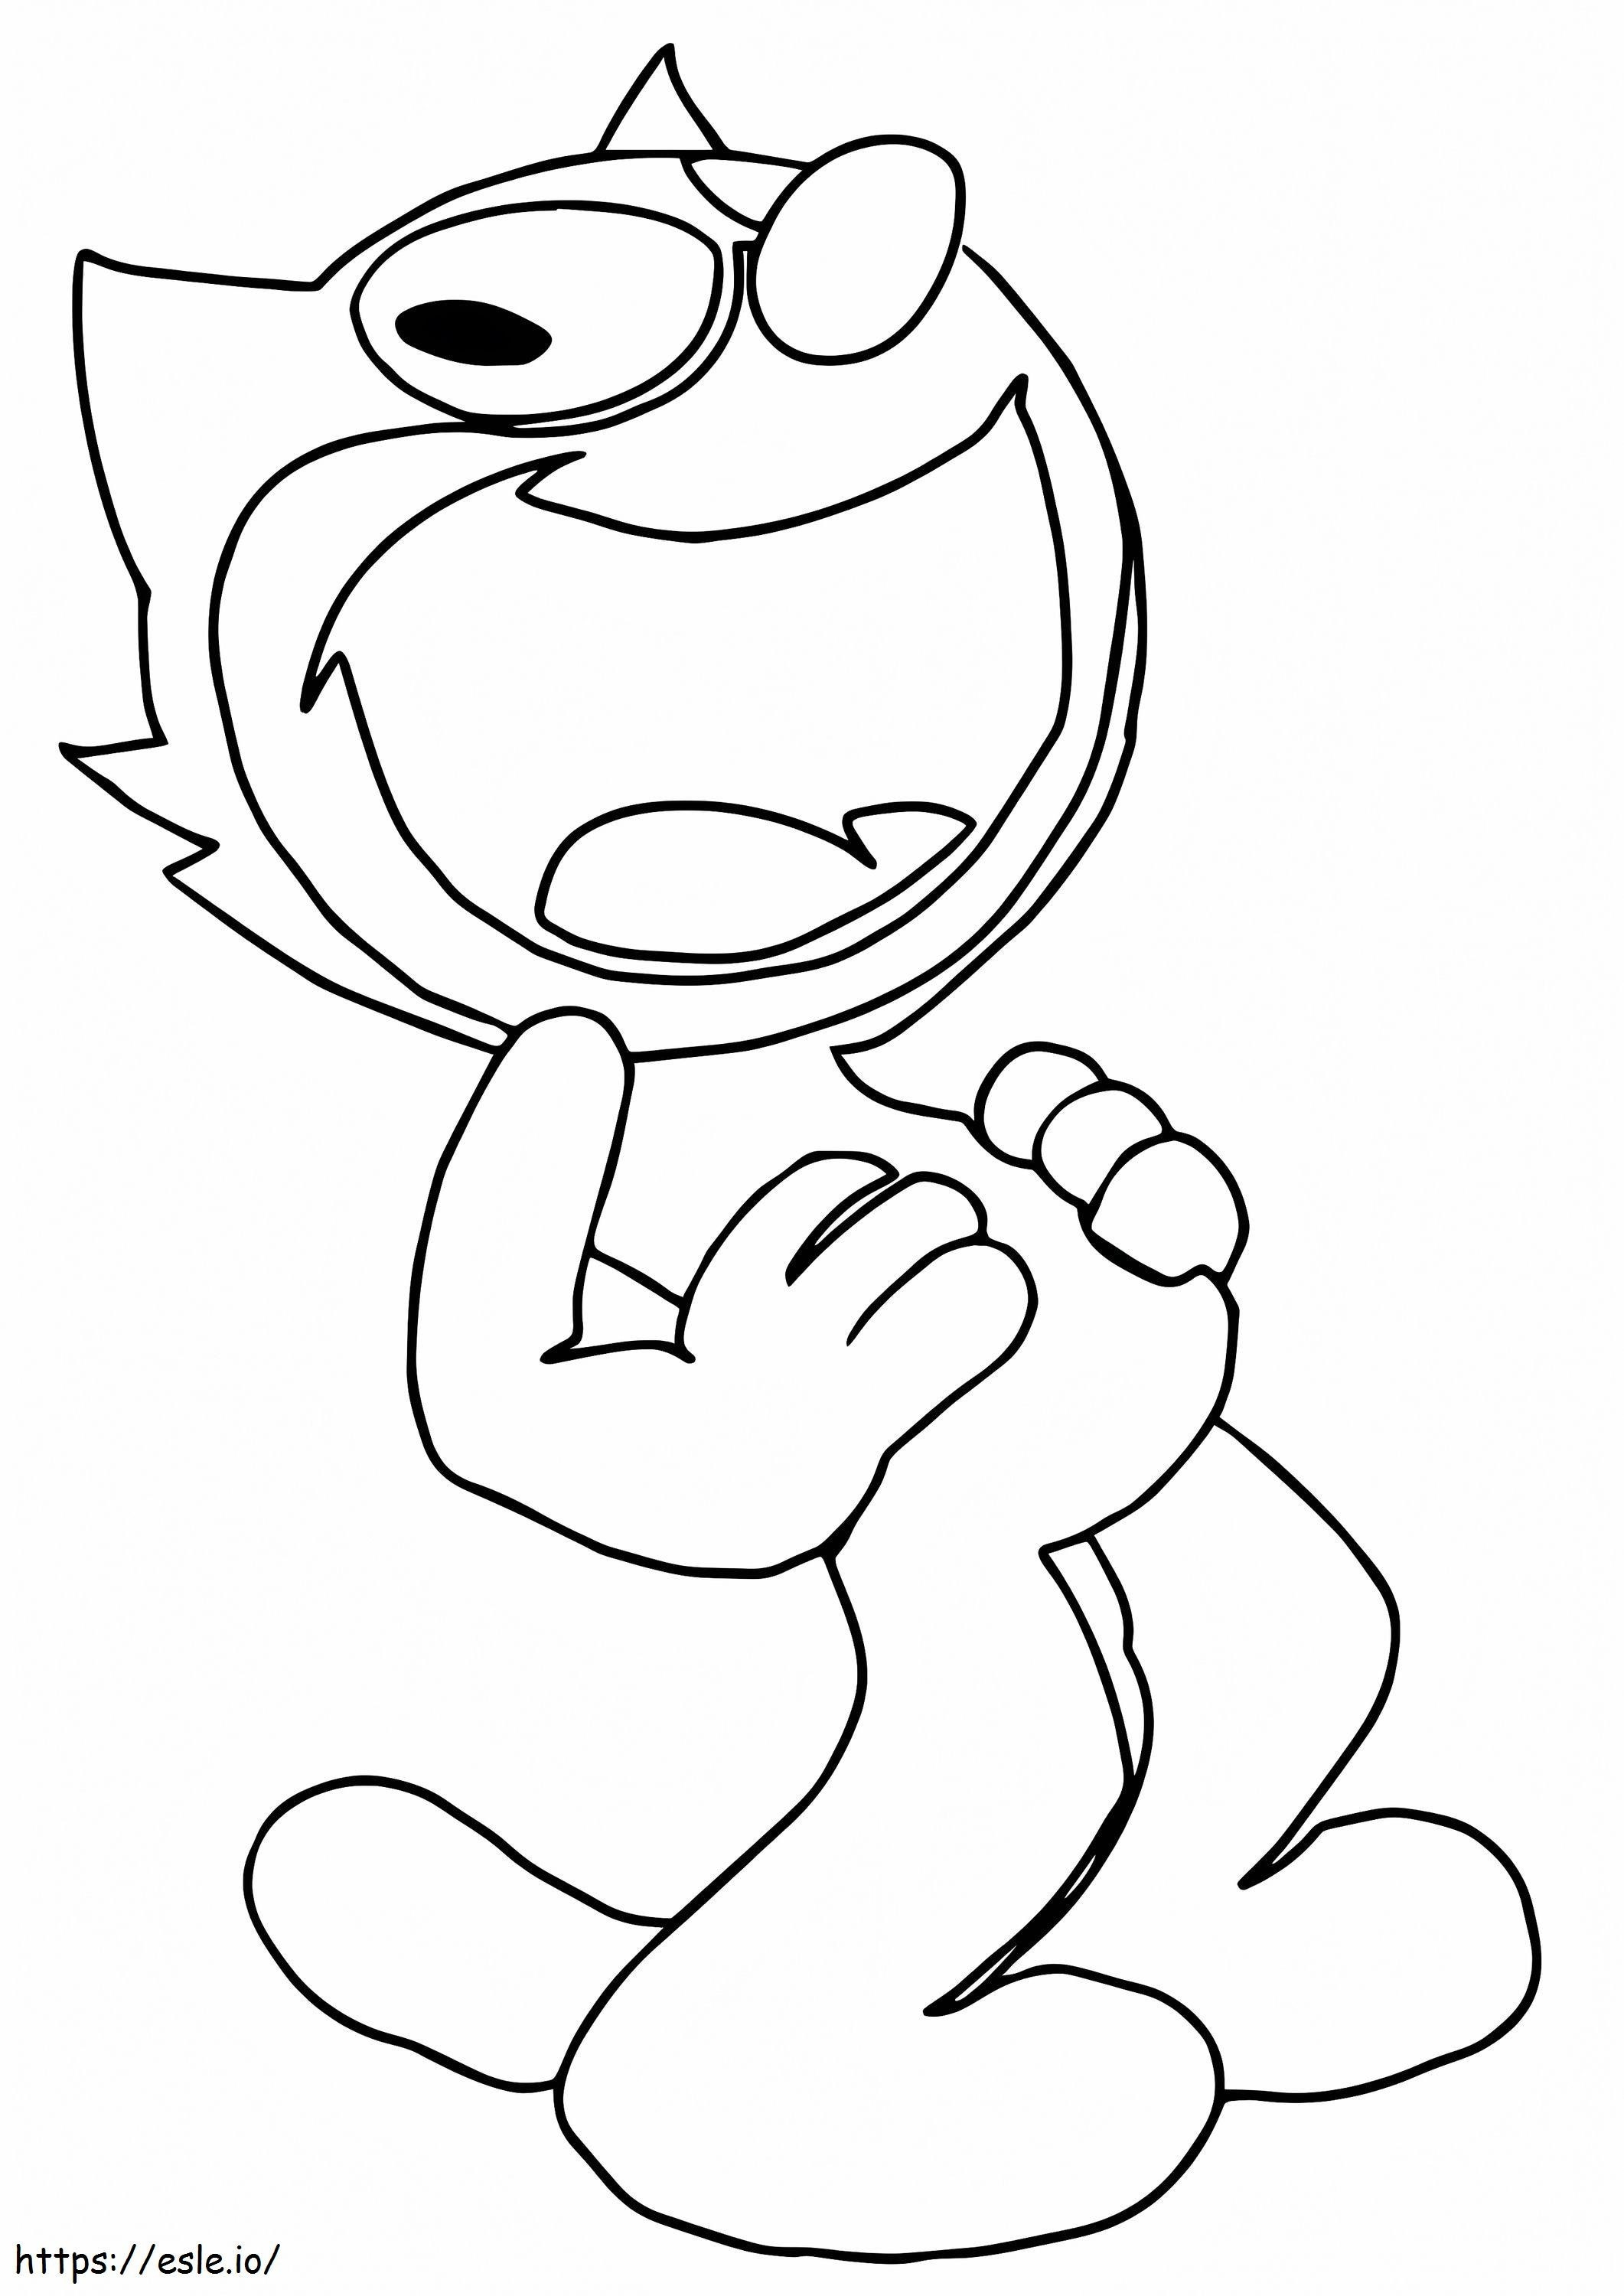 Felix The Cat Laughing coloring page